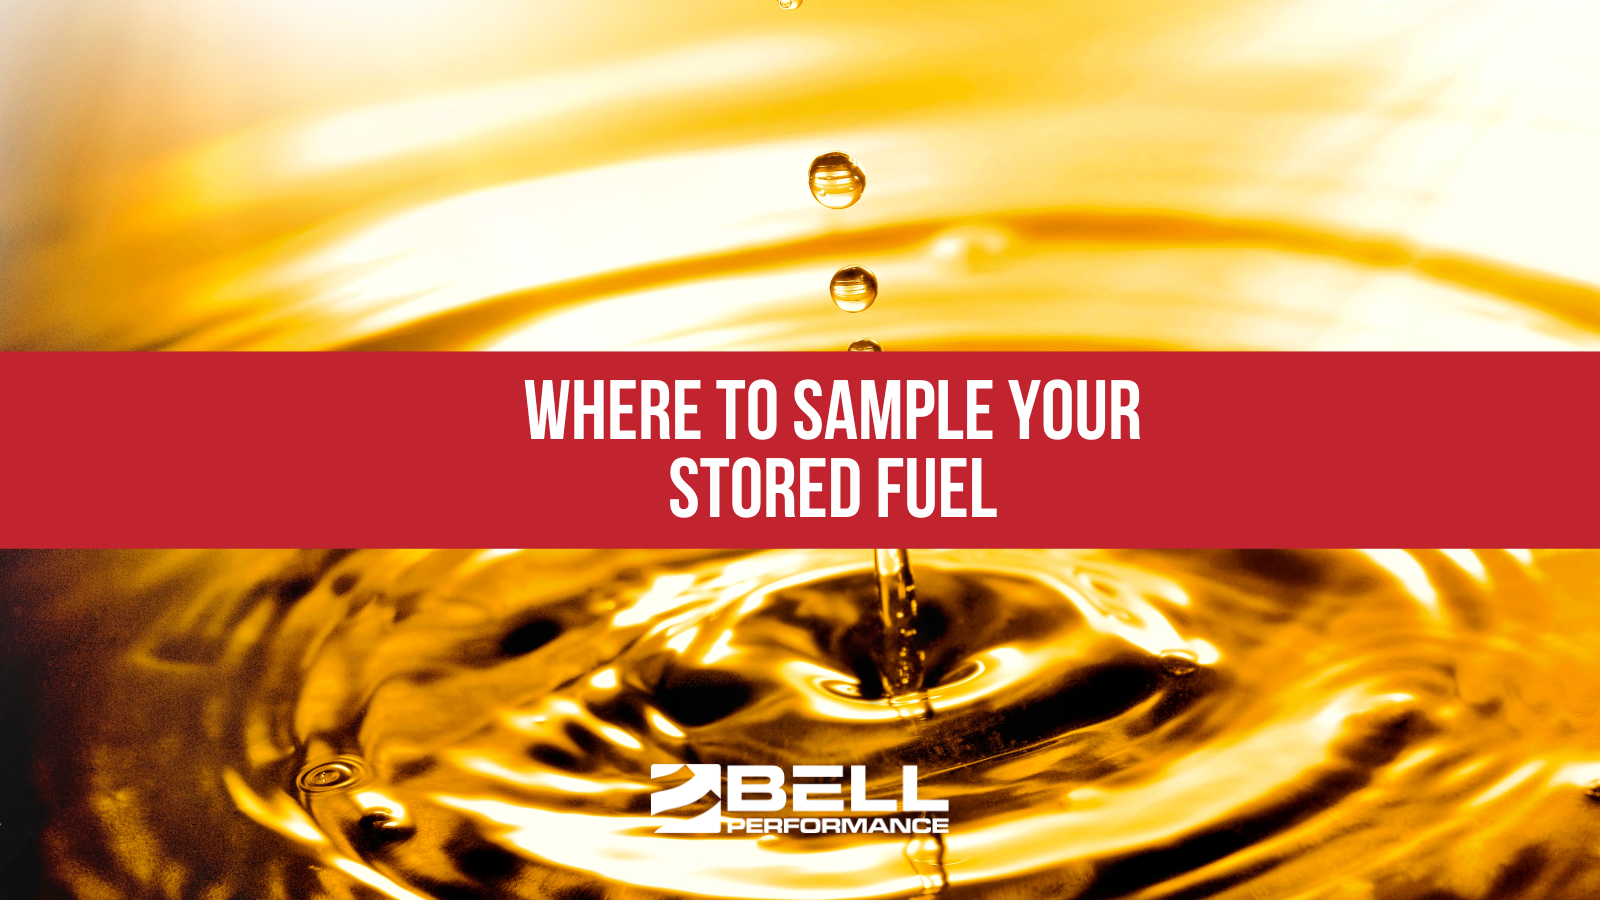 Where To Sample Your Stored Fuel